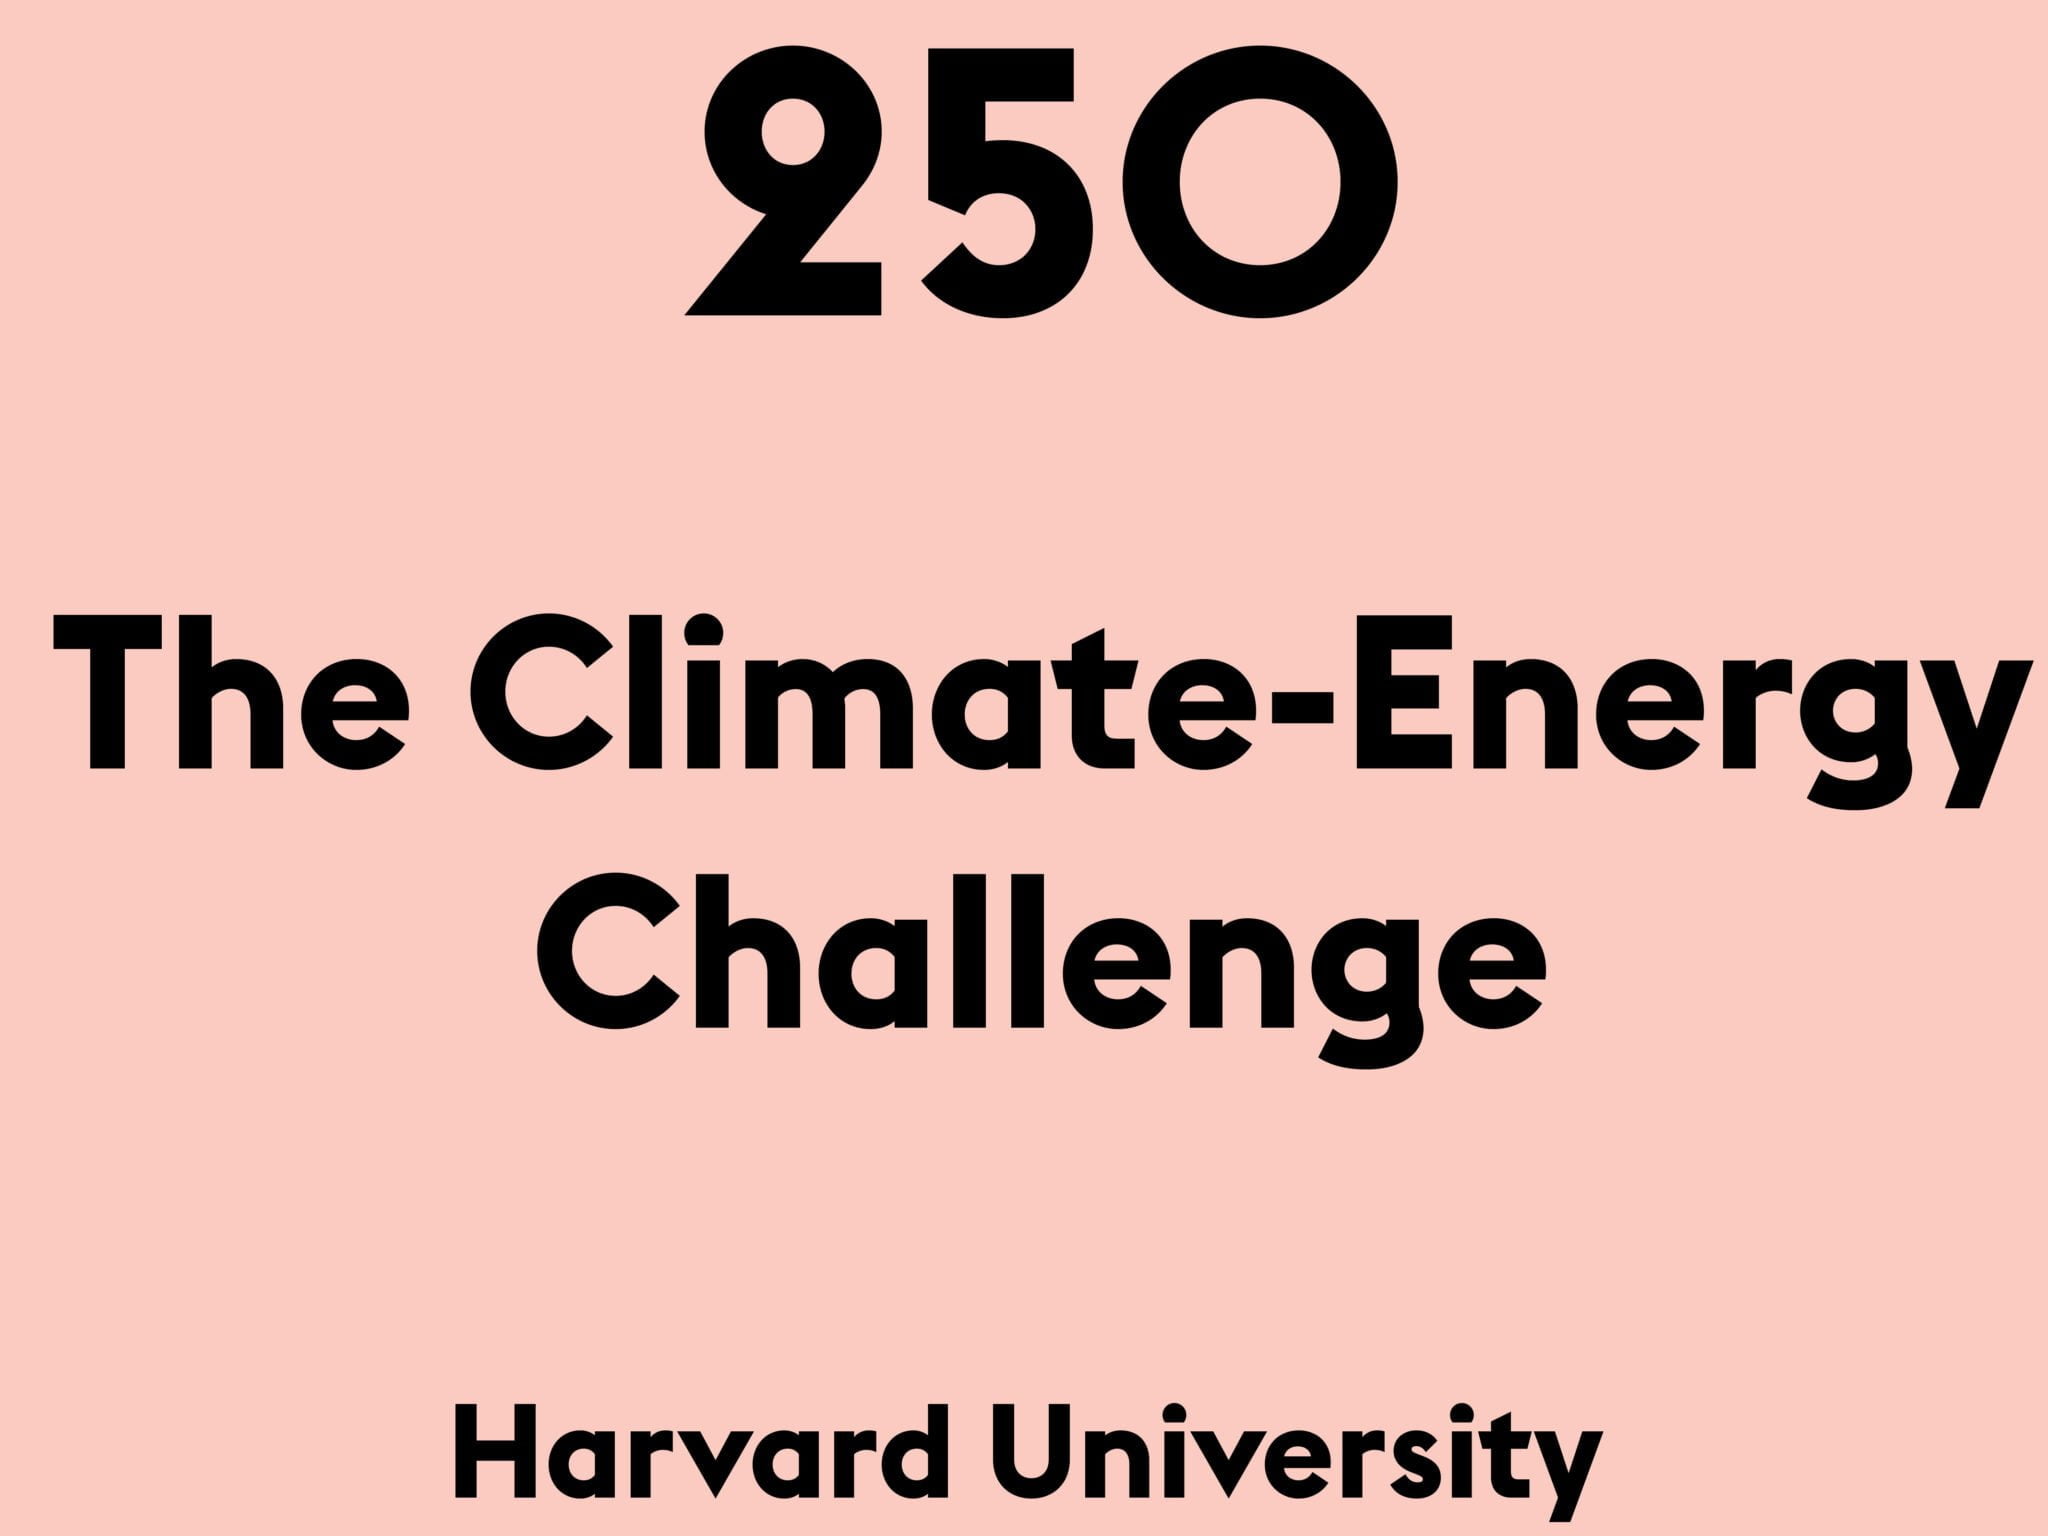 The Climate-Energy Challenge